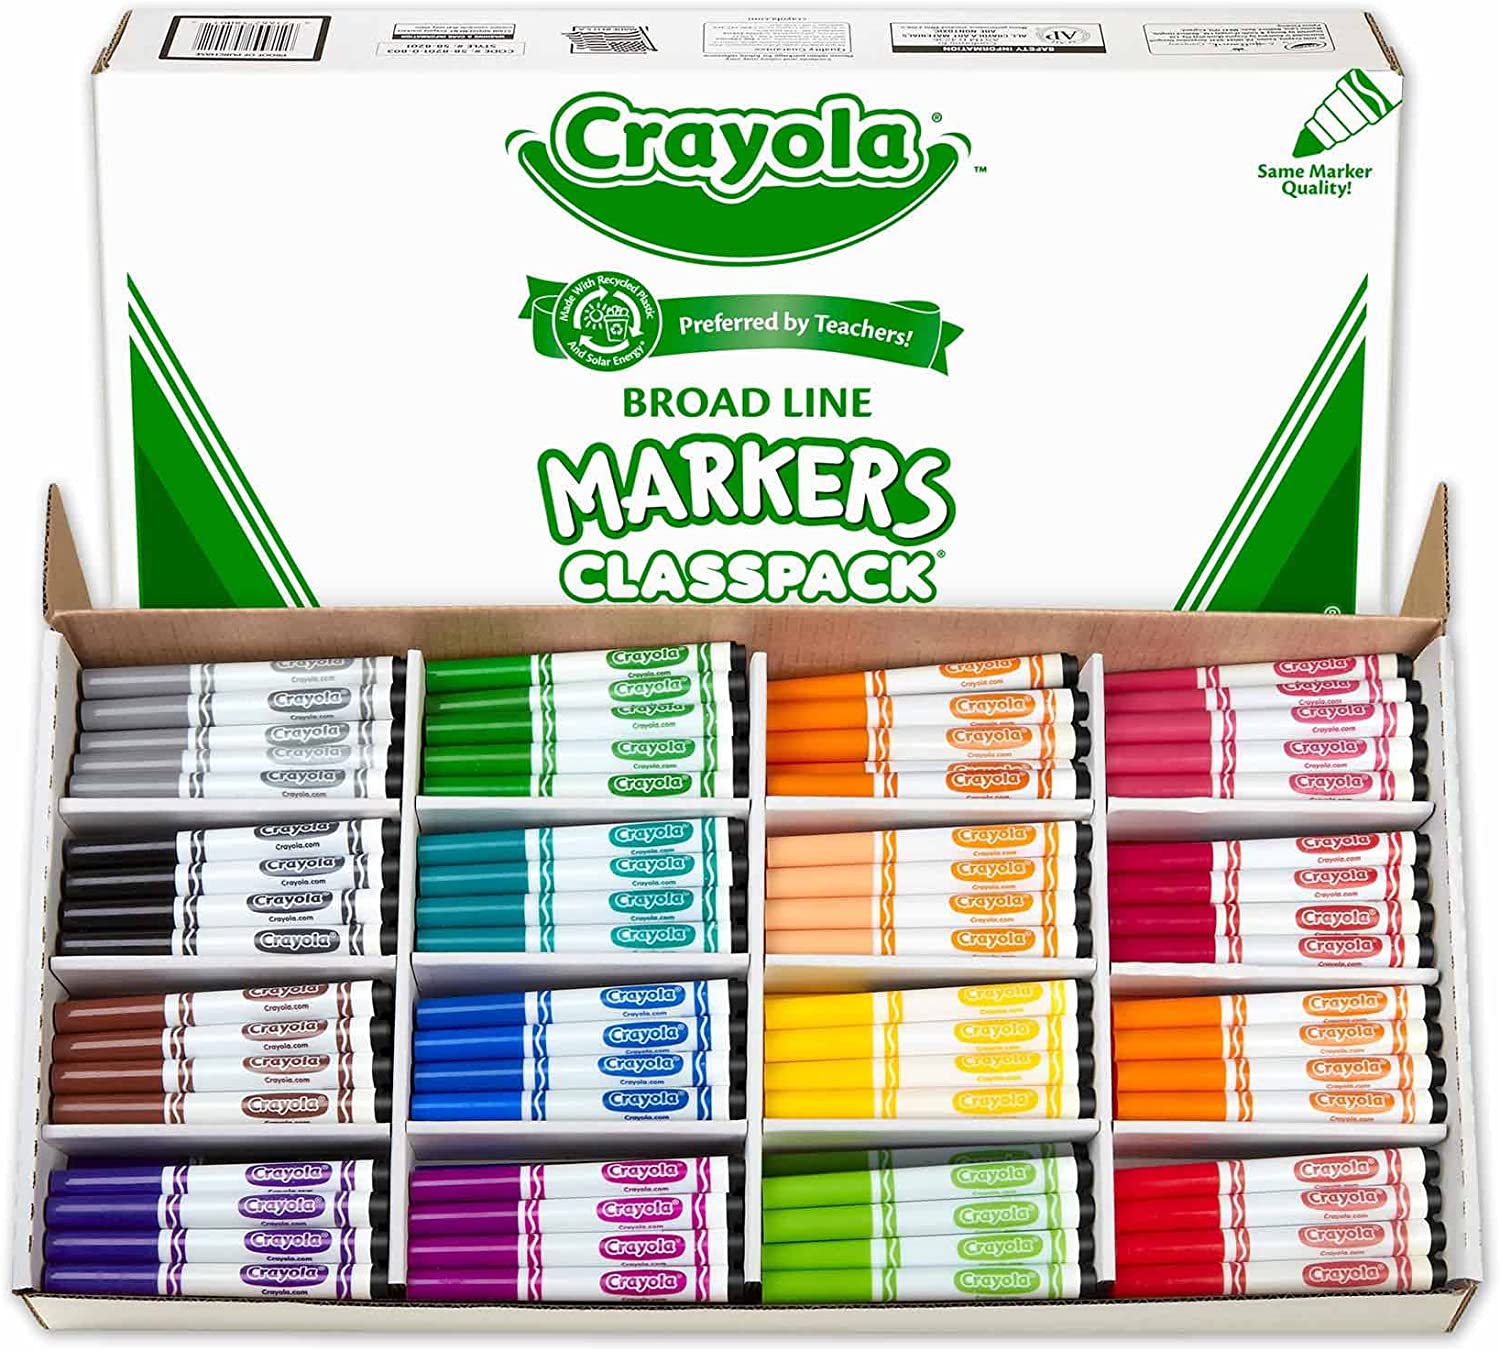 A set of Crayola markers 